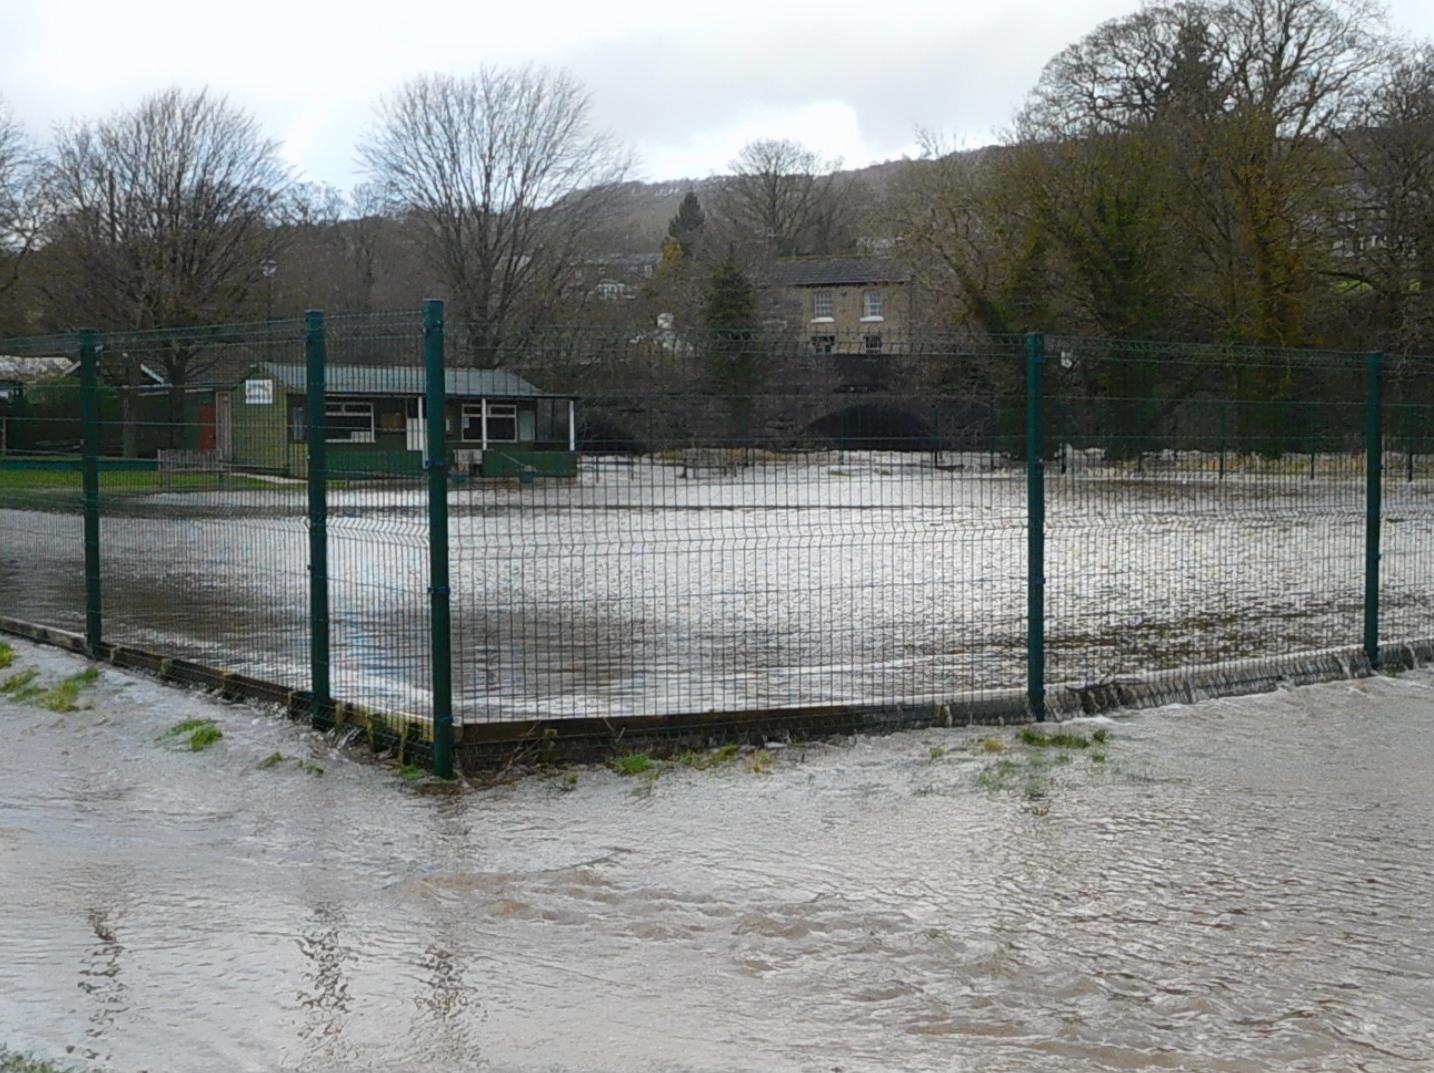 Community facilities were saturated with flood water in Dacre Banks.